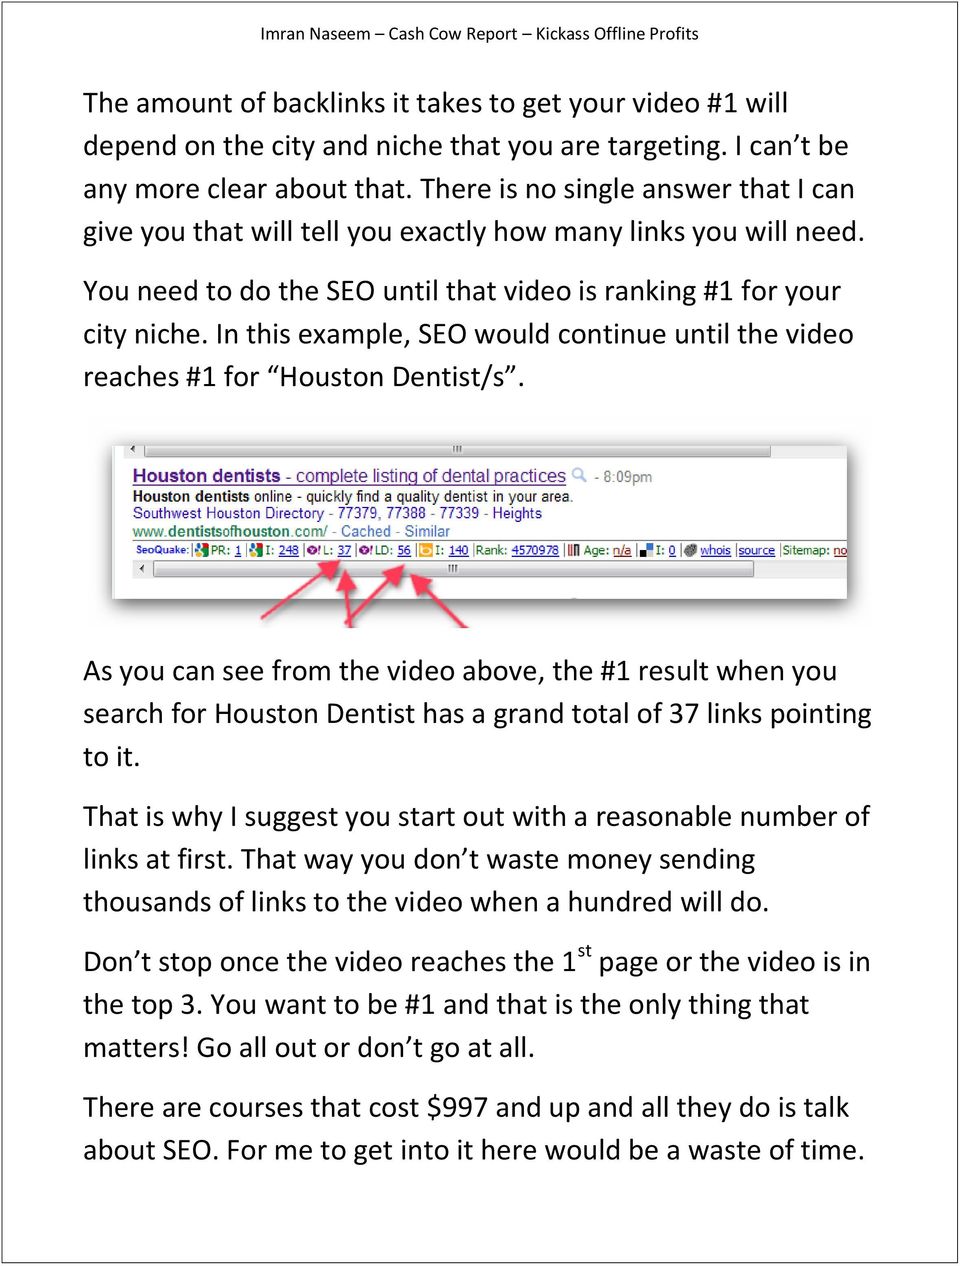 In this example, SEO would continue until the video reaches #1 for Houston Dentist/s.